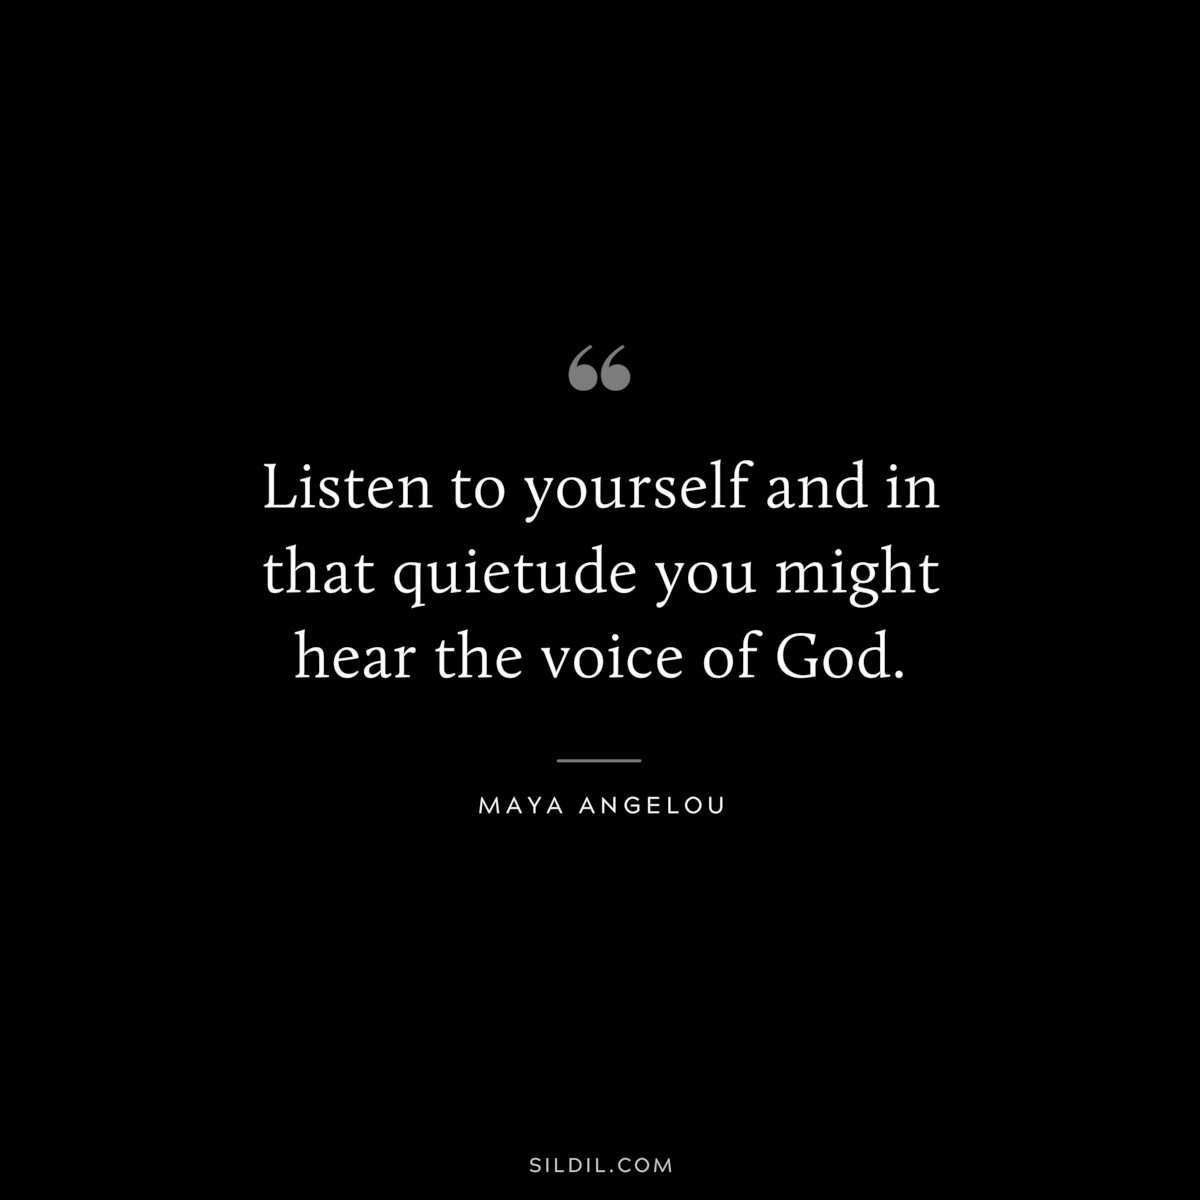 Listen to yourself and in that quietude you might hear the voice of God. ― Maya Angelou